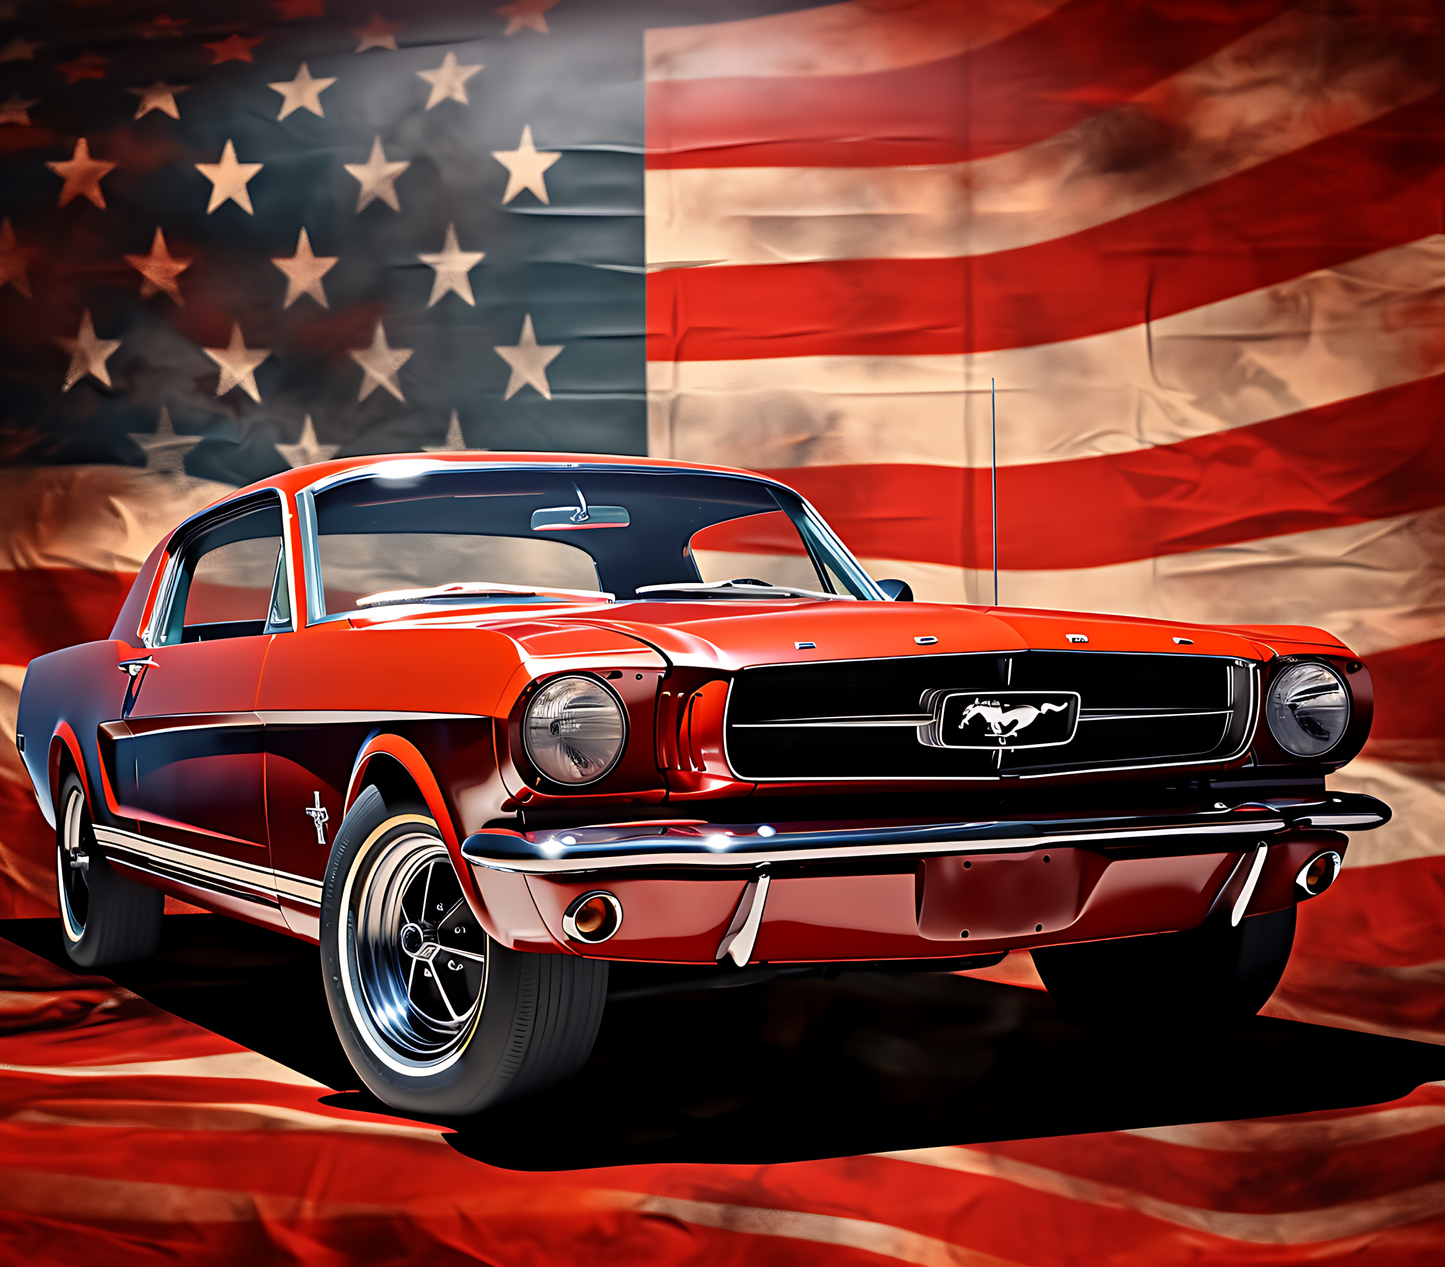 Muscle cars ruled the roads and this tumbler pays homage to the 1966 Ford Mustang in classic red with the American Flag in the background. 